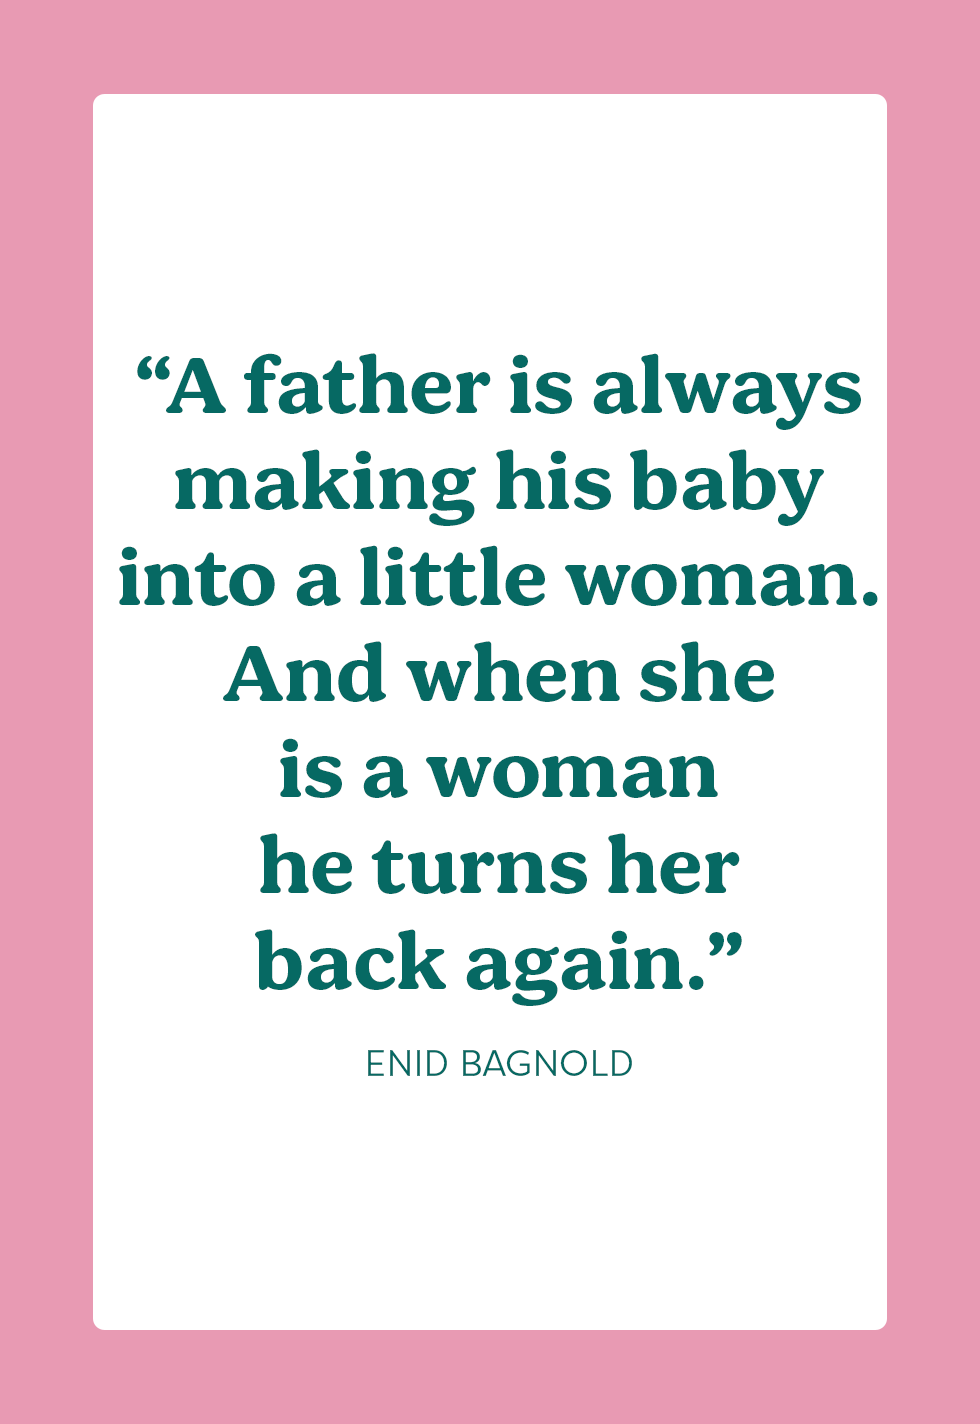 best girl dad quotes